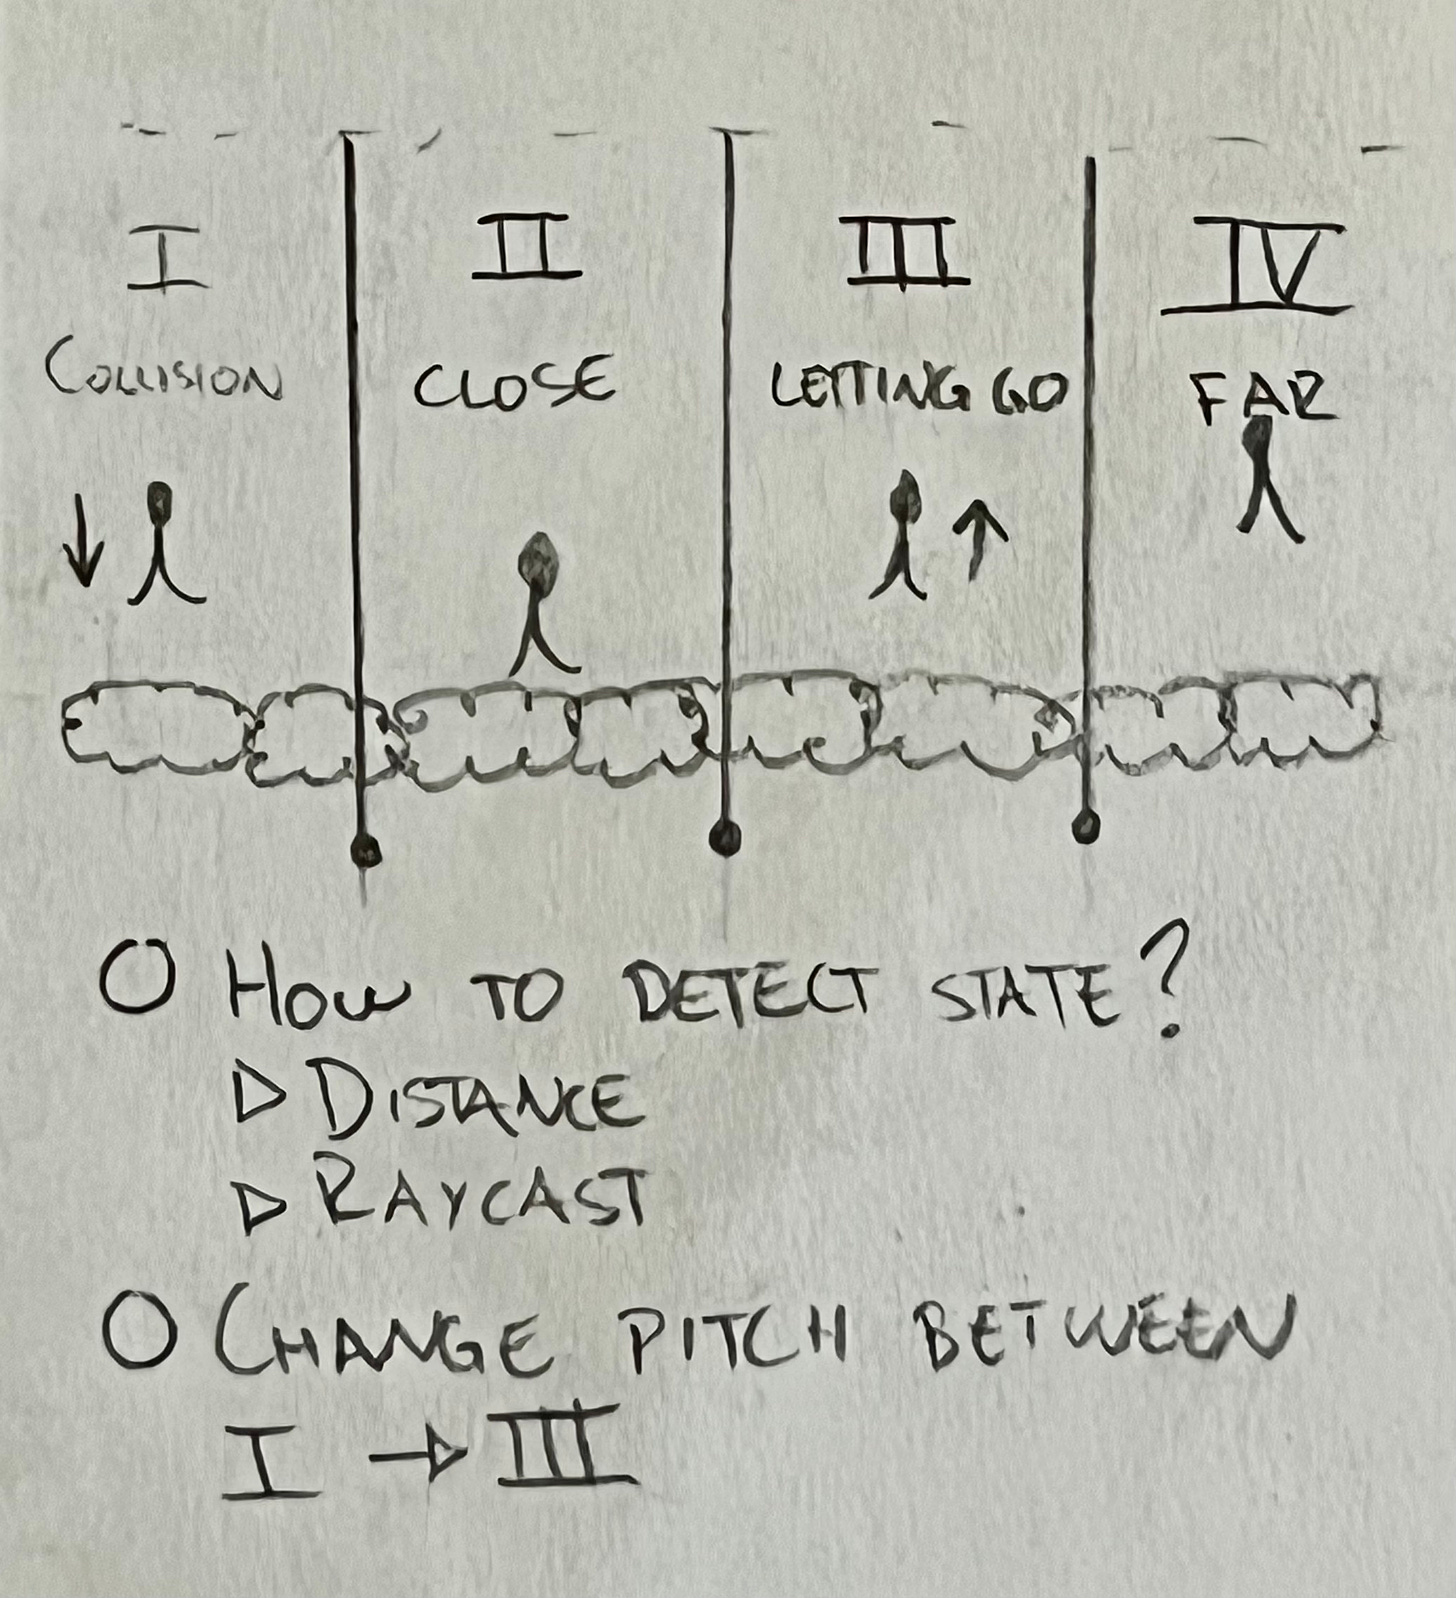 A sketch of a person walking towards bushes and four situations displayed: Collision, close, letting go and far. Below it lists paraphrasing: "How to detect state? Distance / Raycasts" and "Change pitch between collision and letting go"